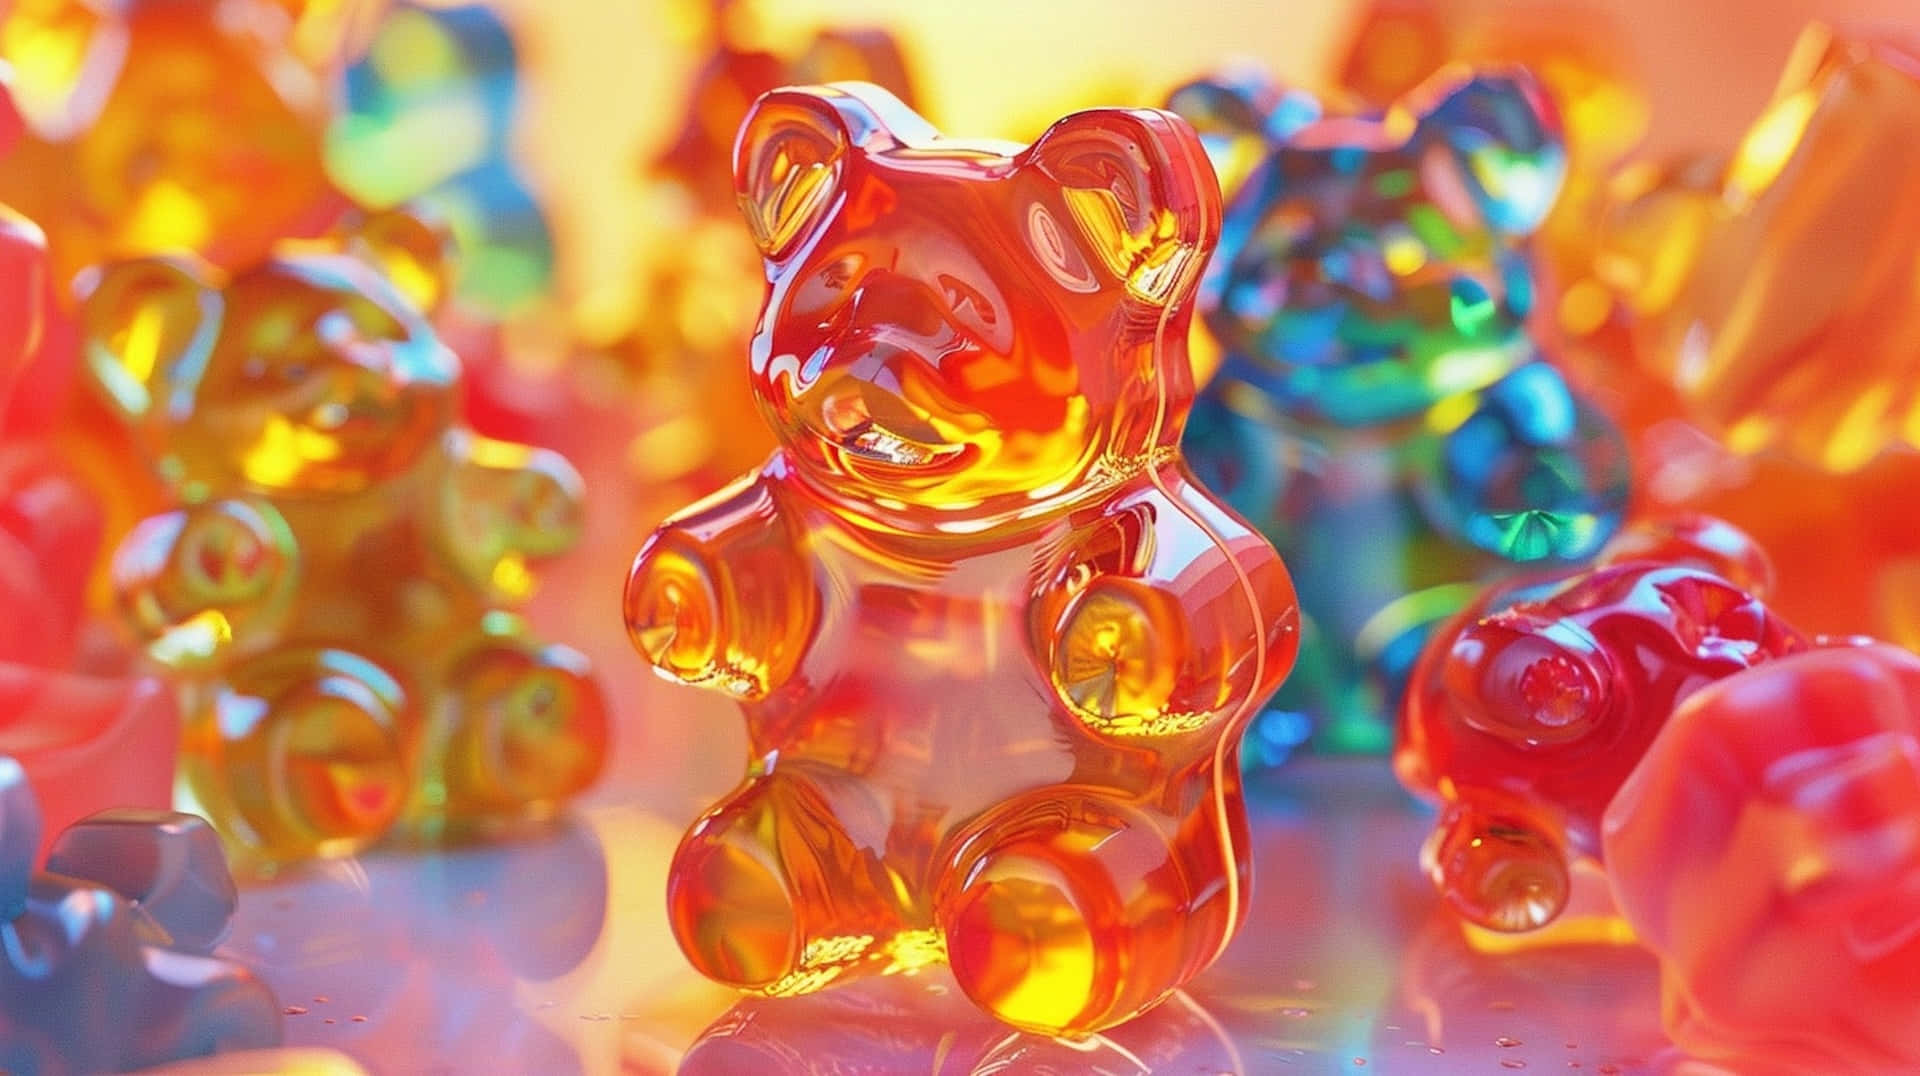 Colorful Gummy Bears Candy Display Wallpaper